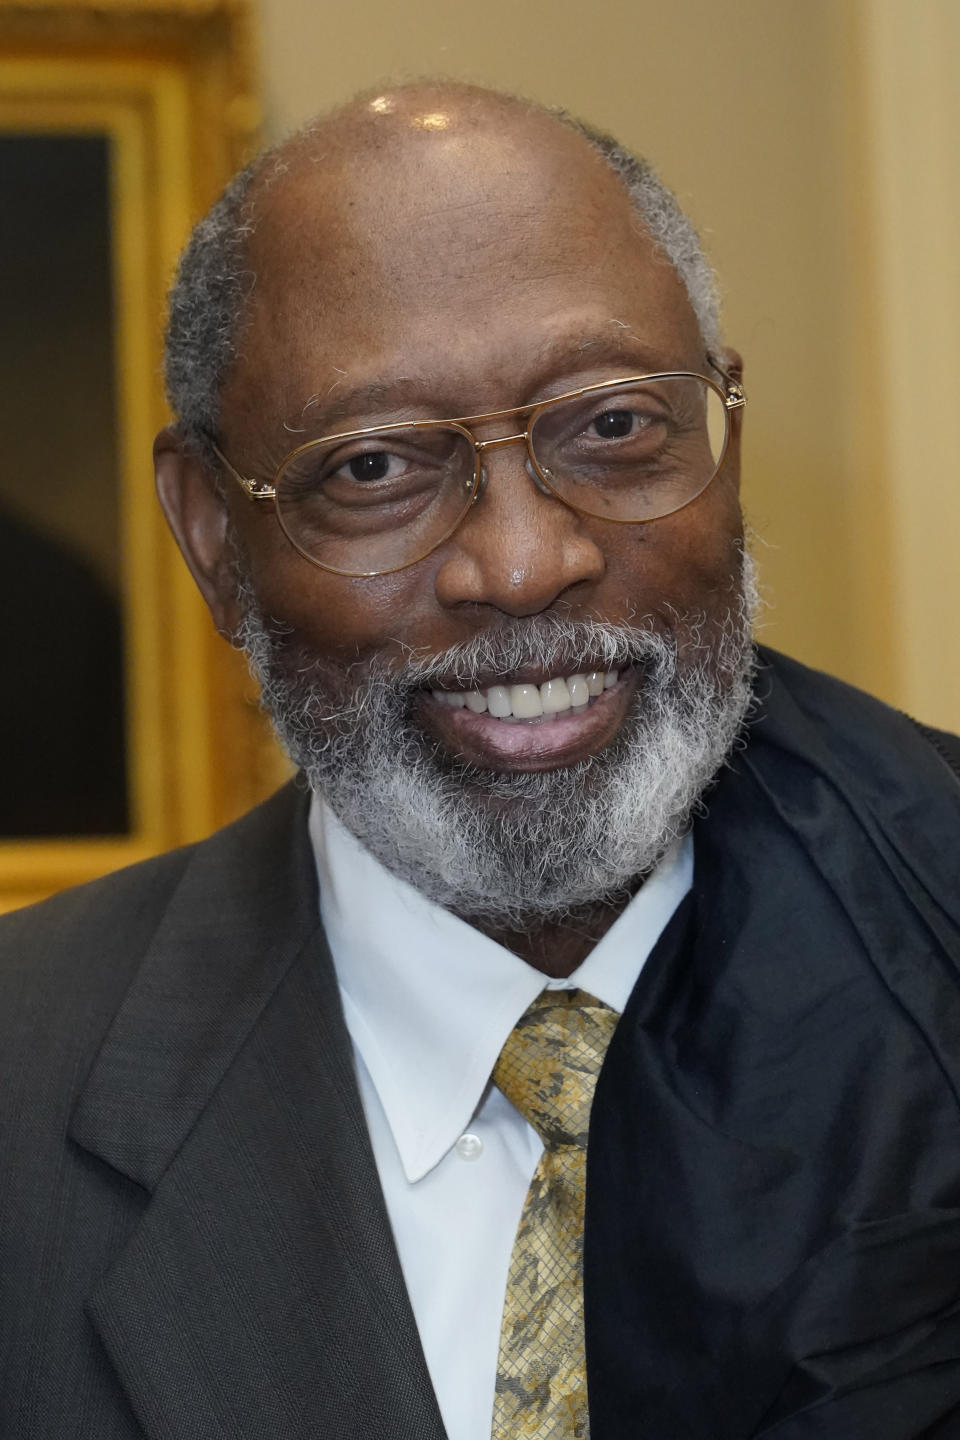 U.S. District Judge Henry Wingate, shown in this Aug. 19, 2022 photograph taken in Jackson, Miss., heard arguments Nov. 28, 2022, in a lawsuit filed in 2015 on behalf of some Mississippi death row inmates. Wingate noted that one of the plaintiffs in the lawsuit, Thomas Edwin Loden Jr., is facing a Dec. 14 execution date. (AP Photo/Rogelio V. Solis)